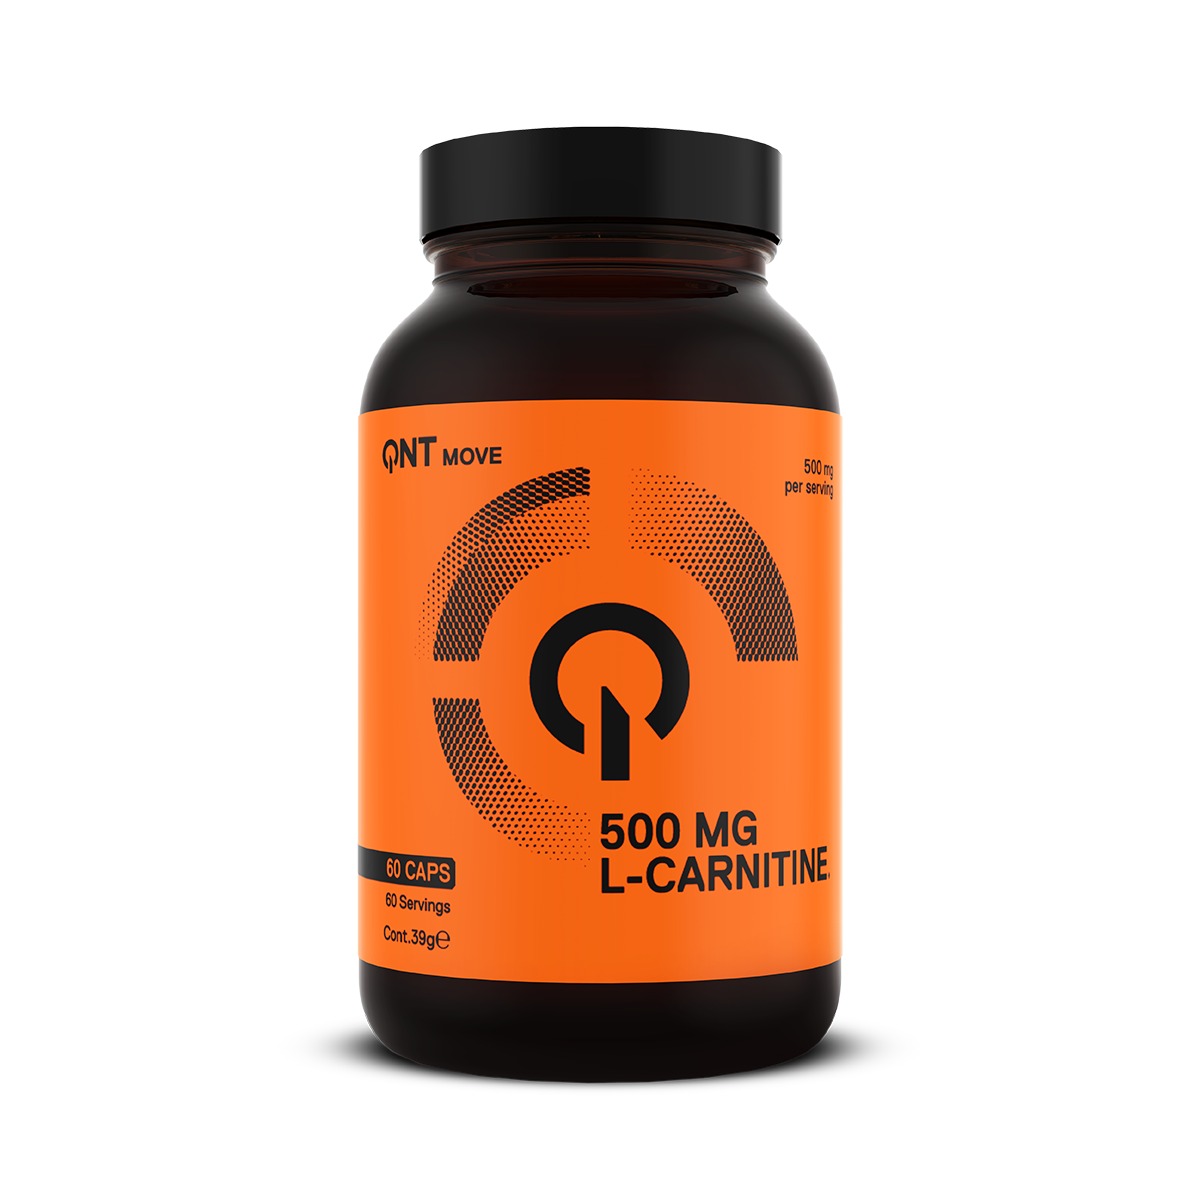 L-carnitine 500mg - 60cps